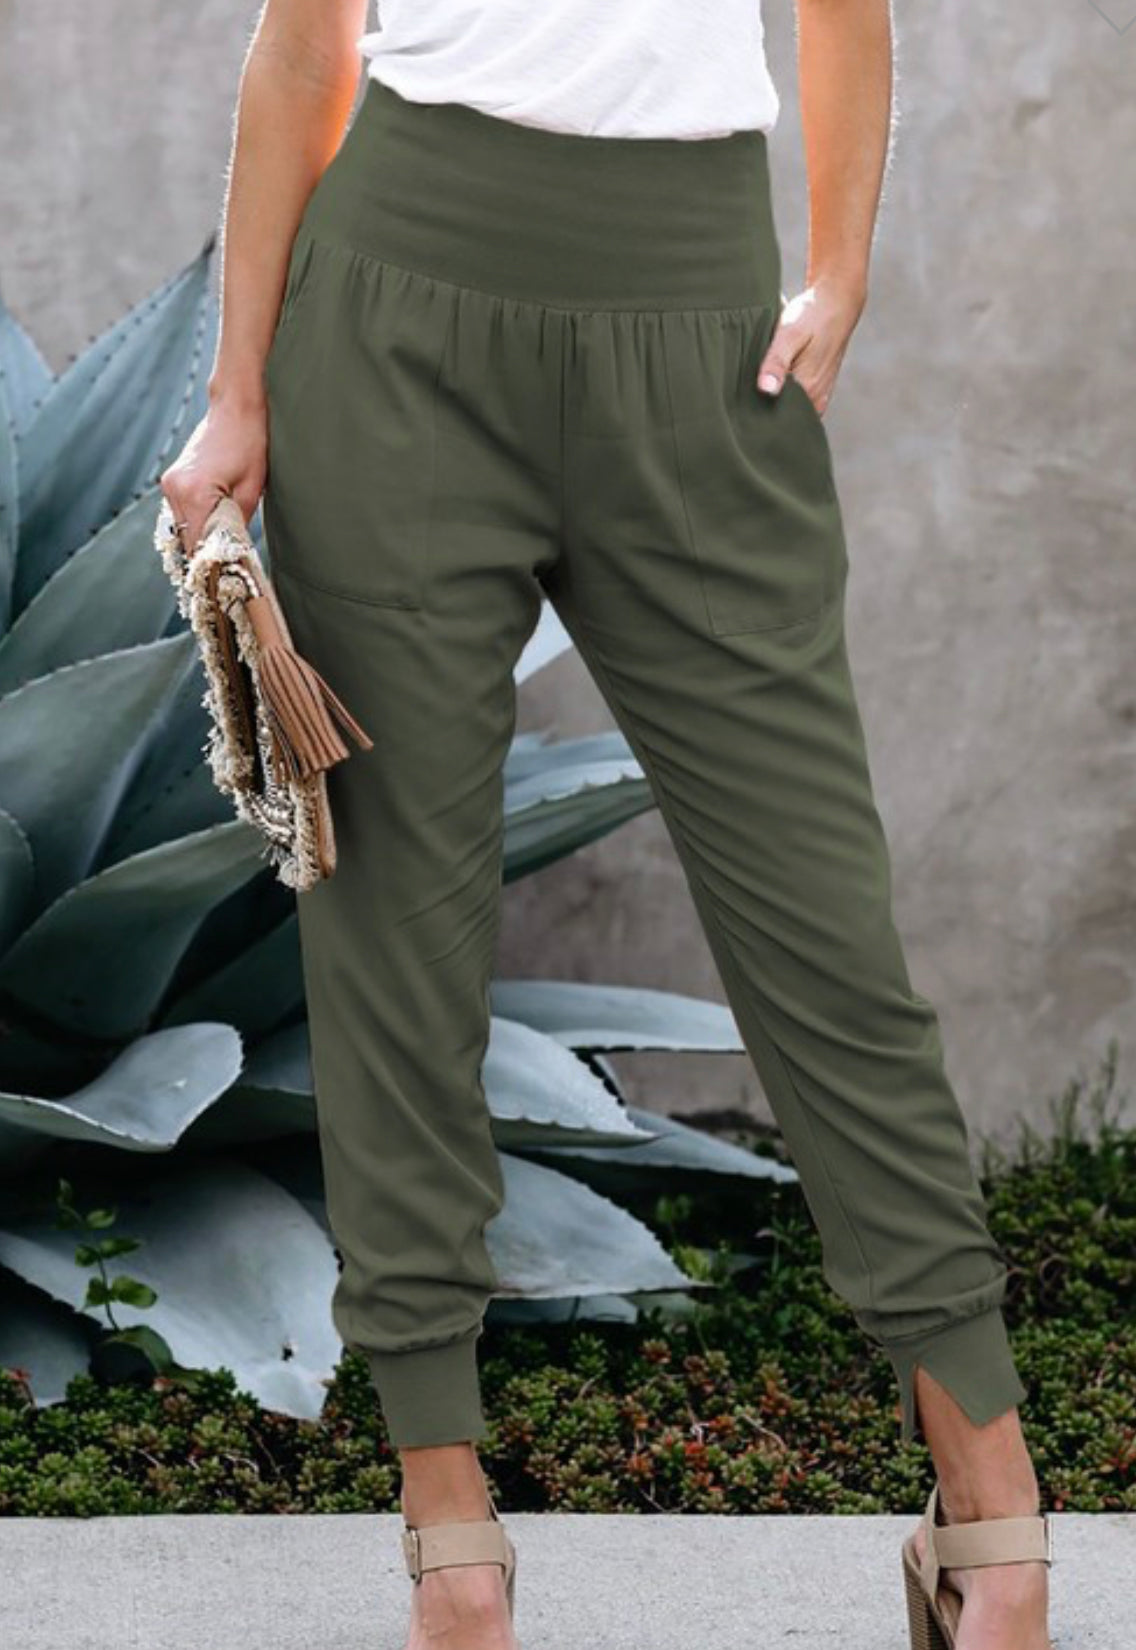 Uptown Stretch High Waisted Pants